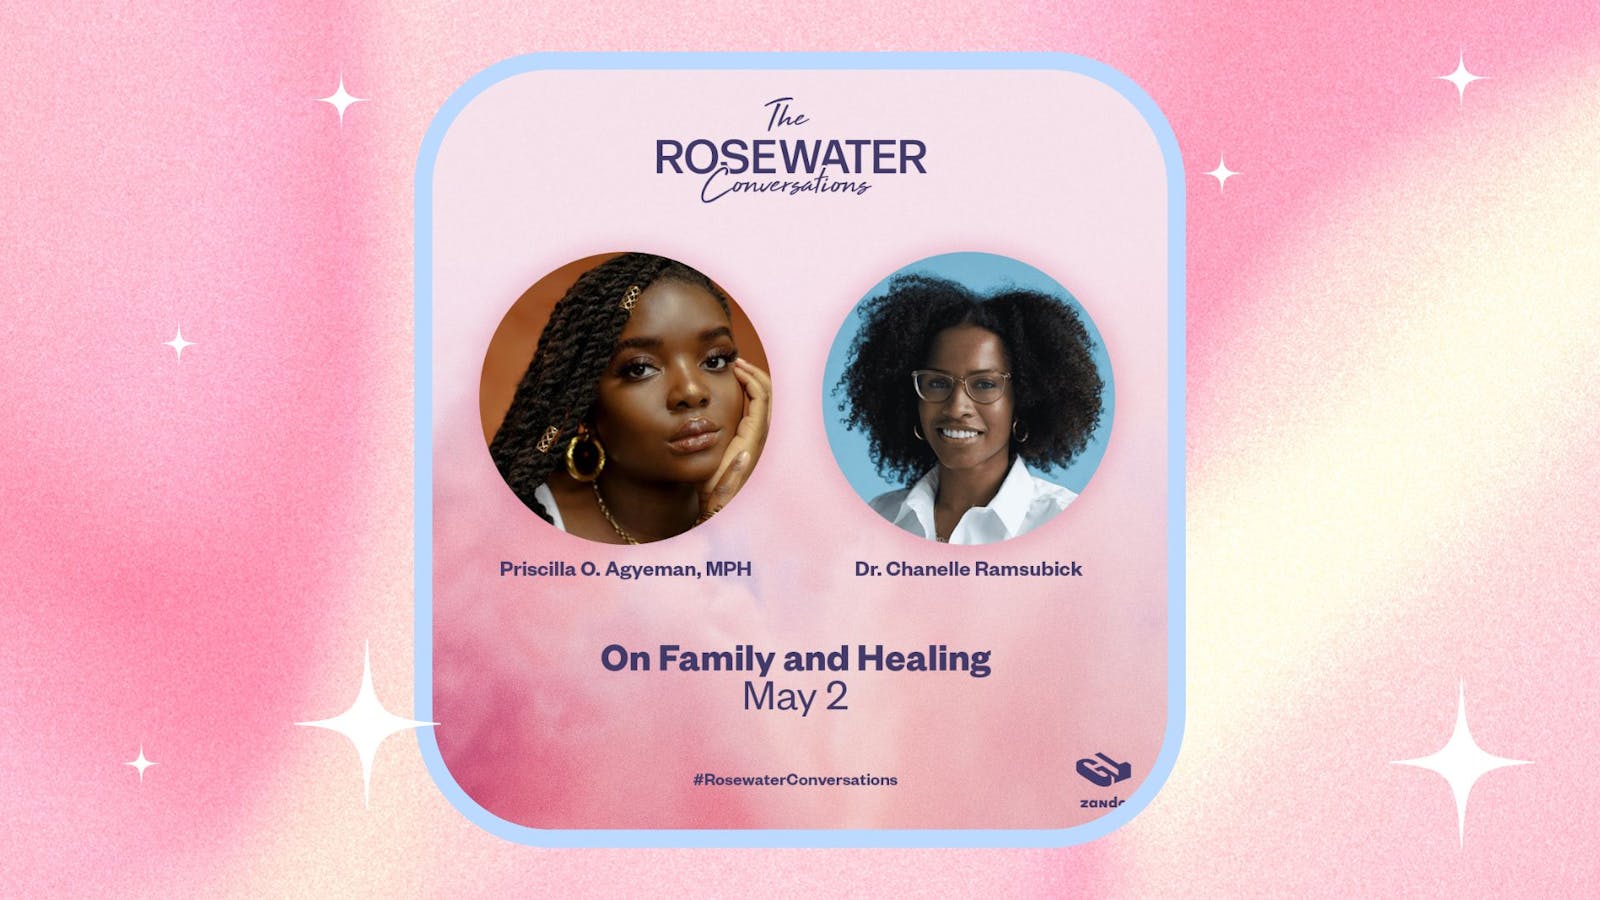 The Rosewater Convos: Generational Healing with Dr. Chanelle Ramsubick and Priscilla O. Agyeman, MPH